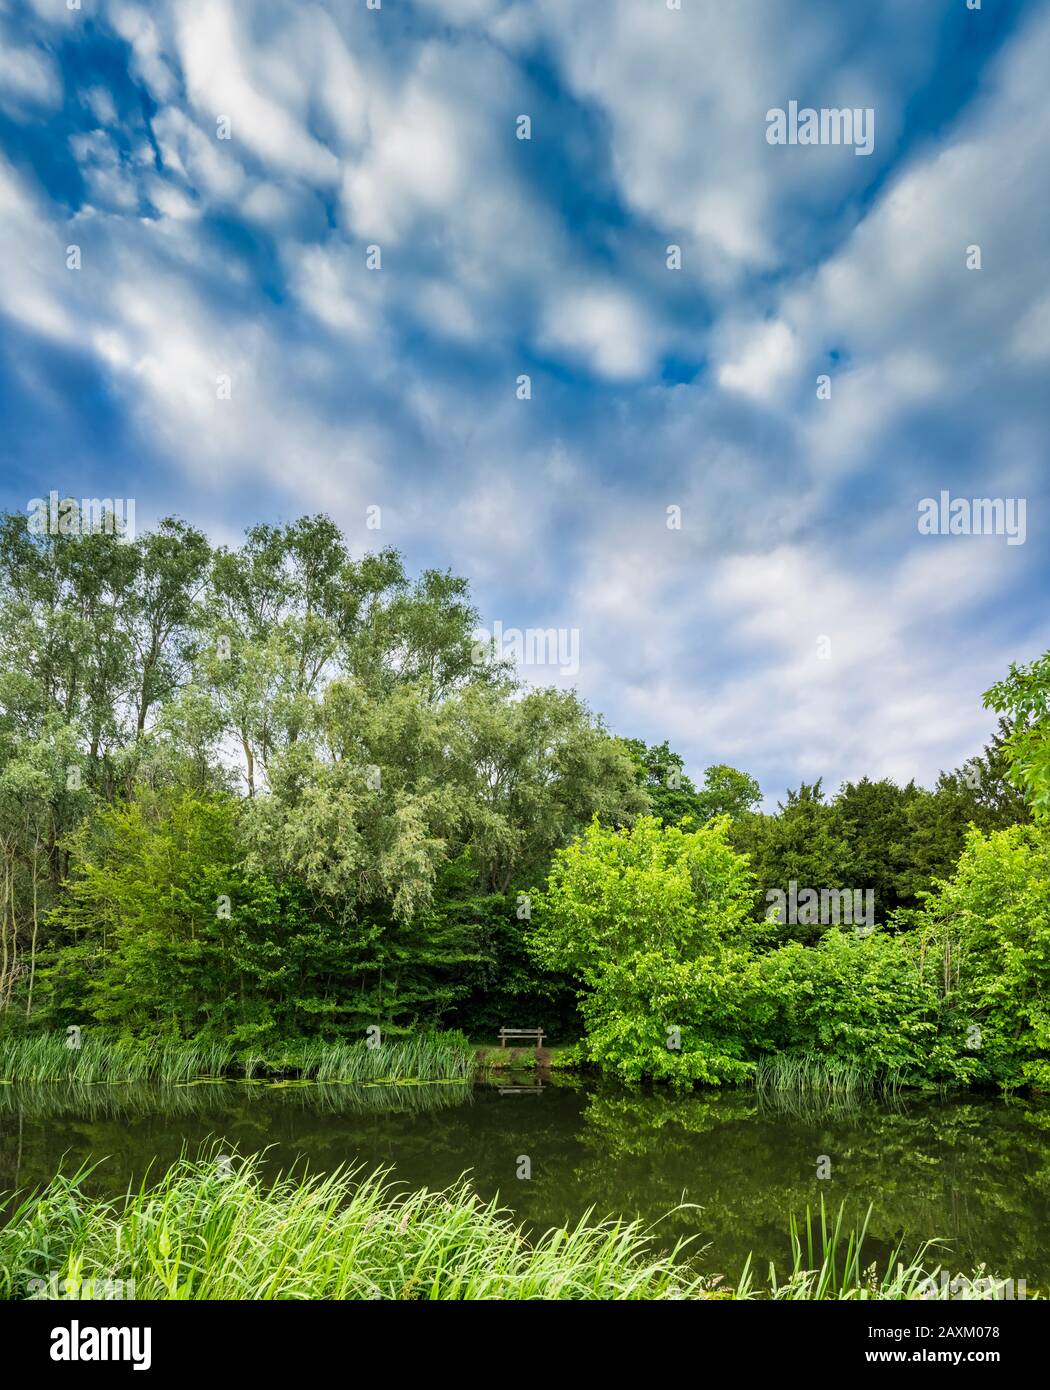 ￼The River Nene flowing through woodland near Peterborough, Cambridgeshire, on a warm summer evening with mackerel sky (altocumulus clouds) Stock Photo